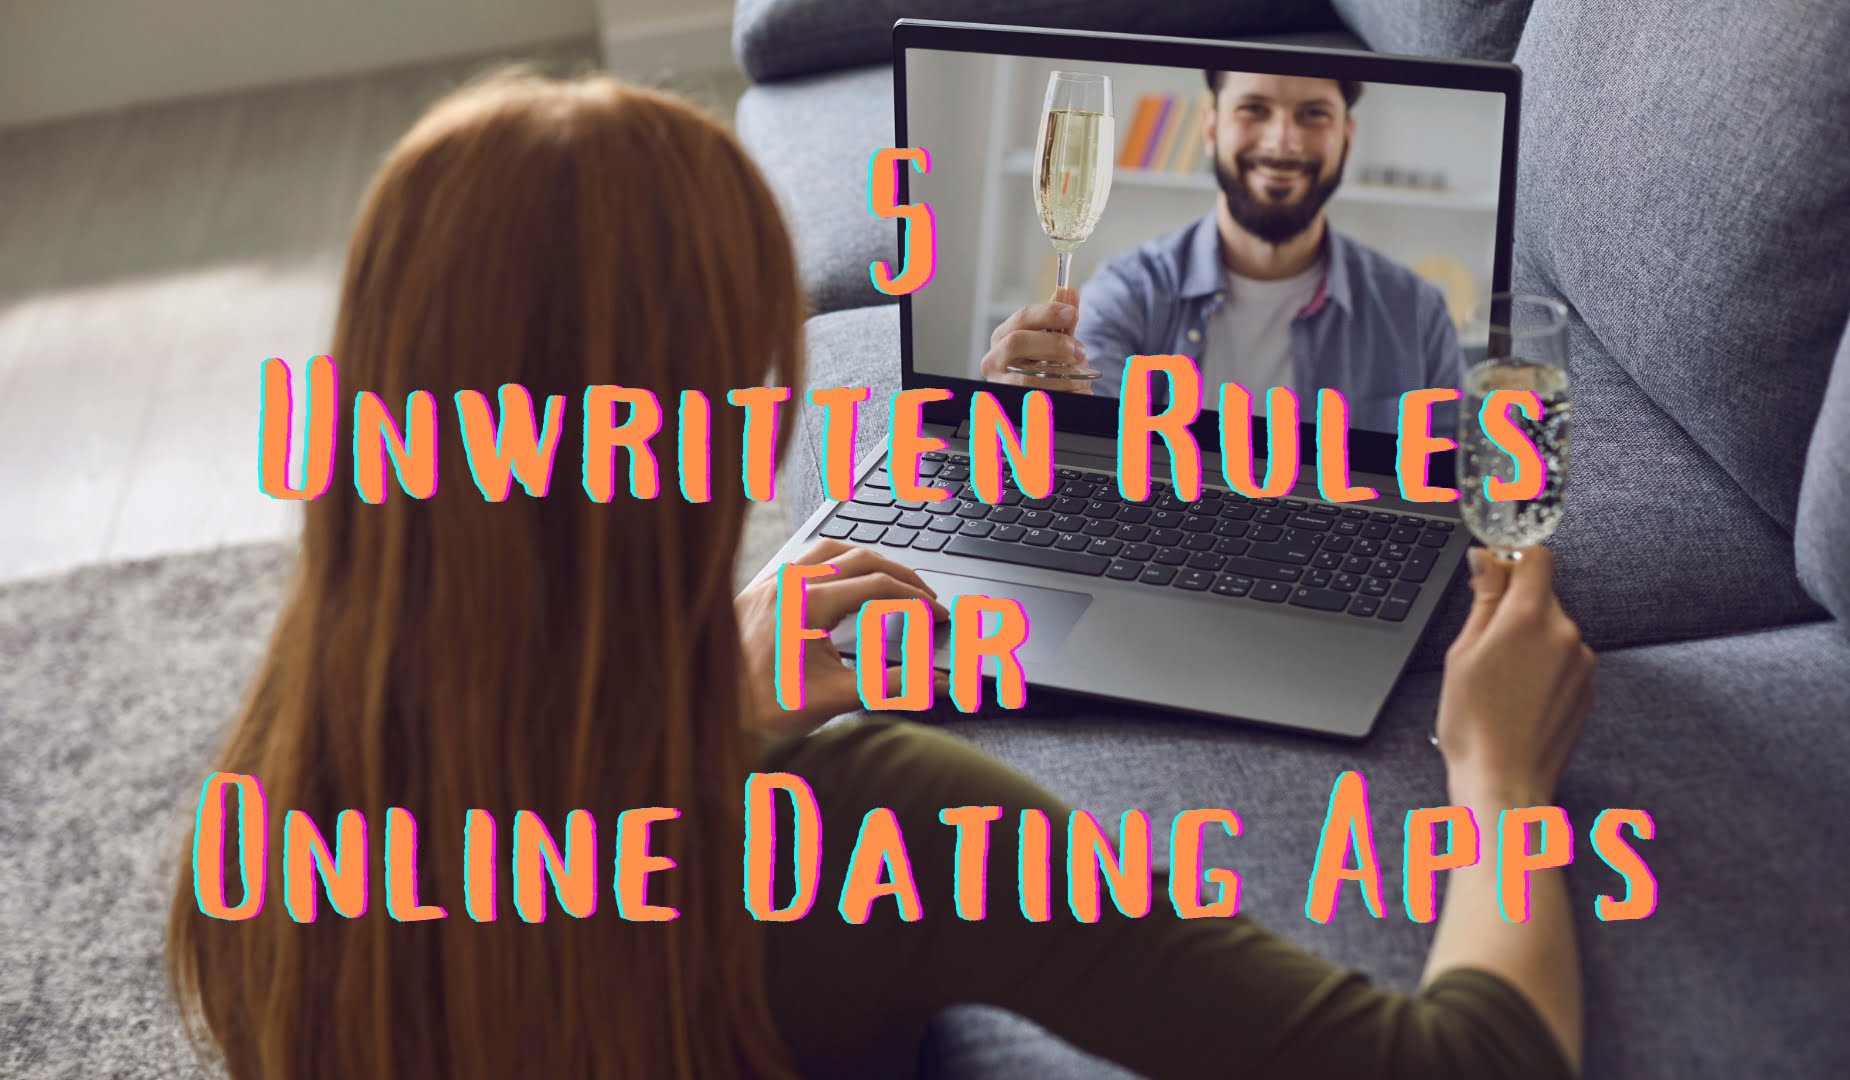 5 Unwritten Rules for Online Dating Apps